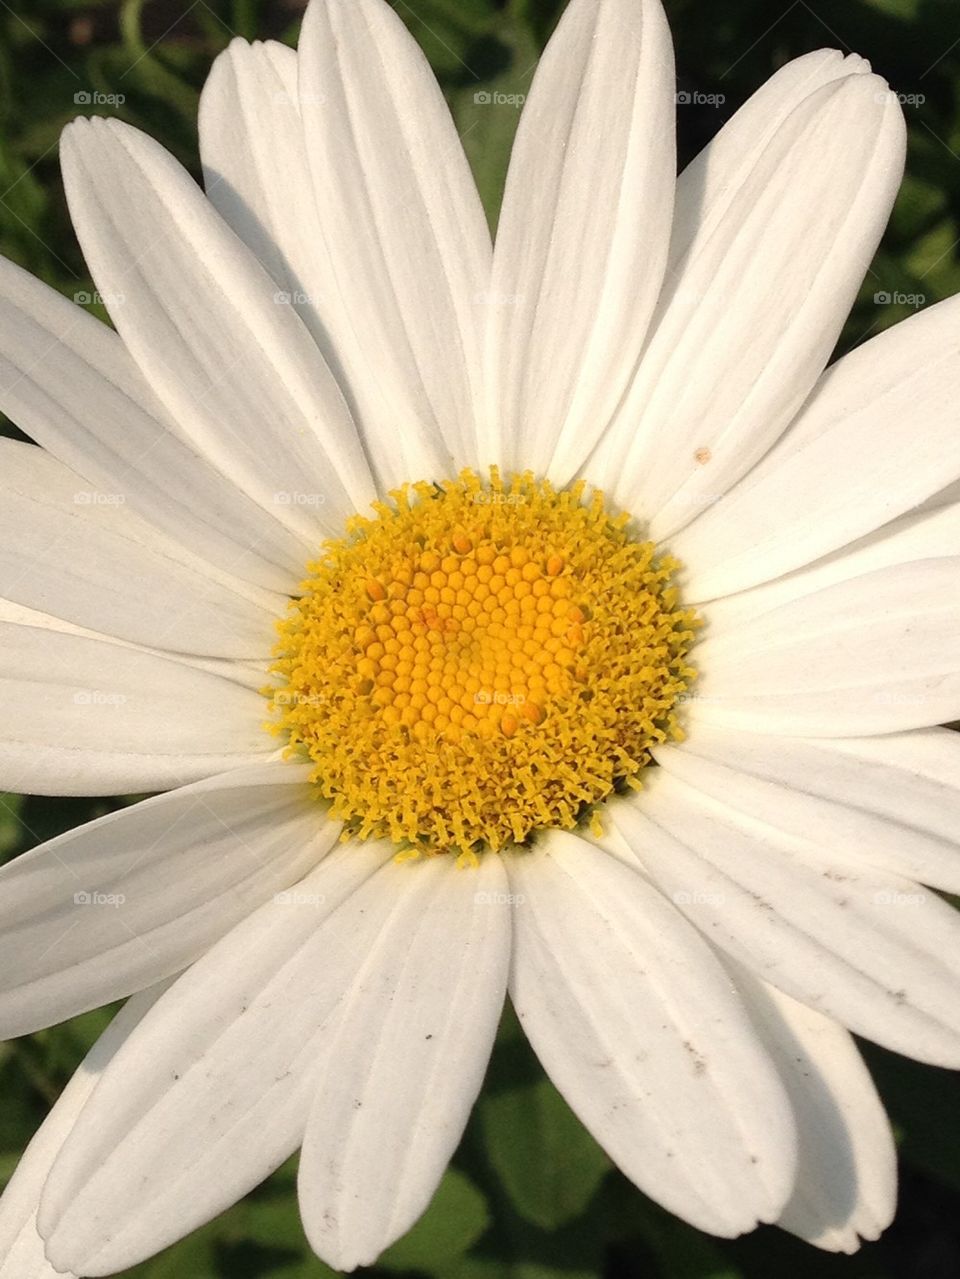 Up close and personal with Daisy